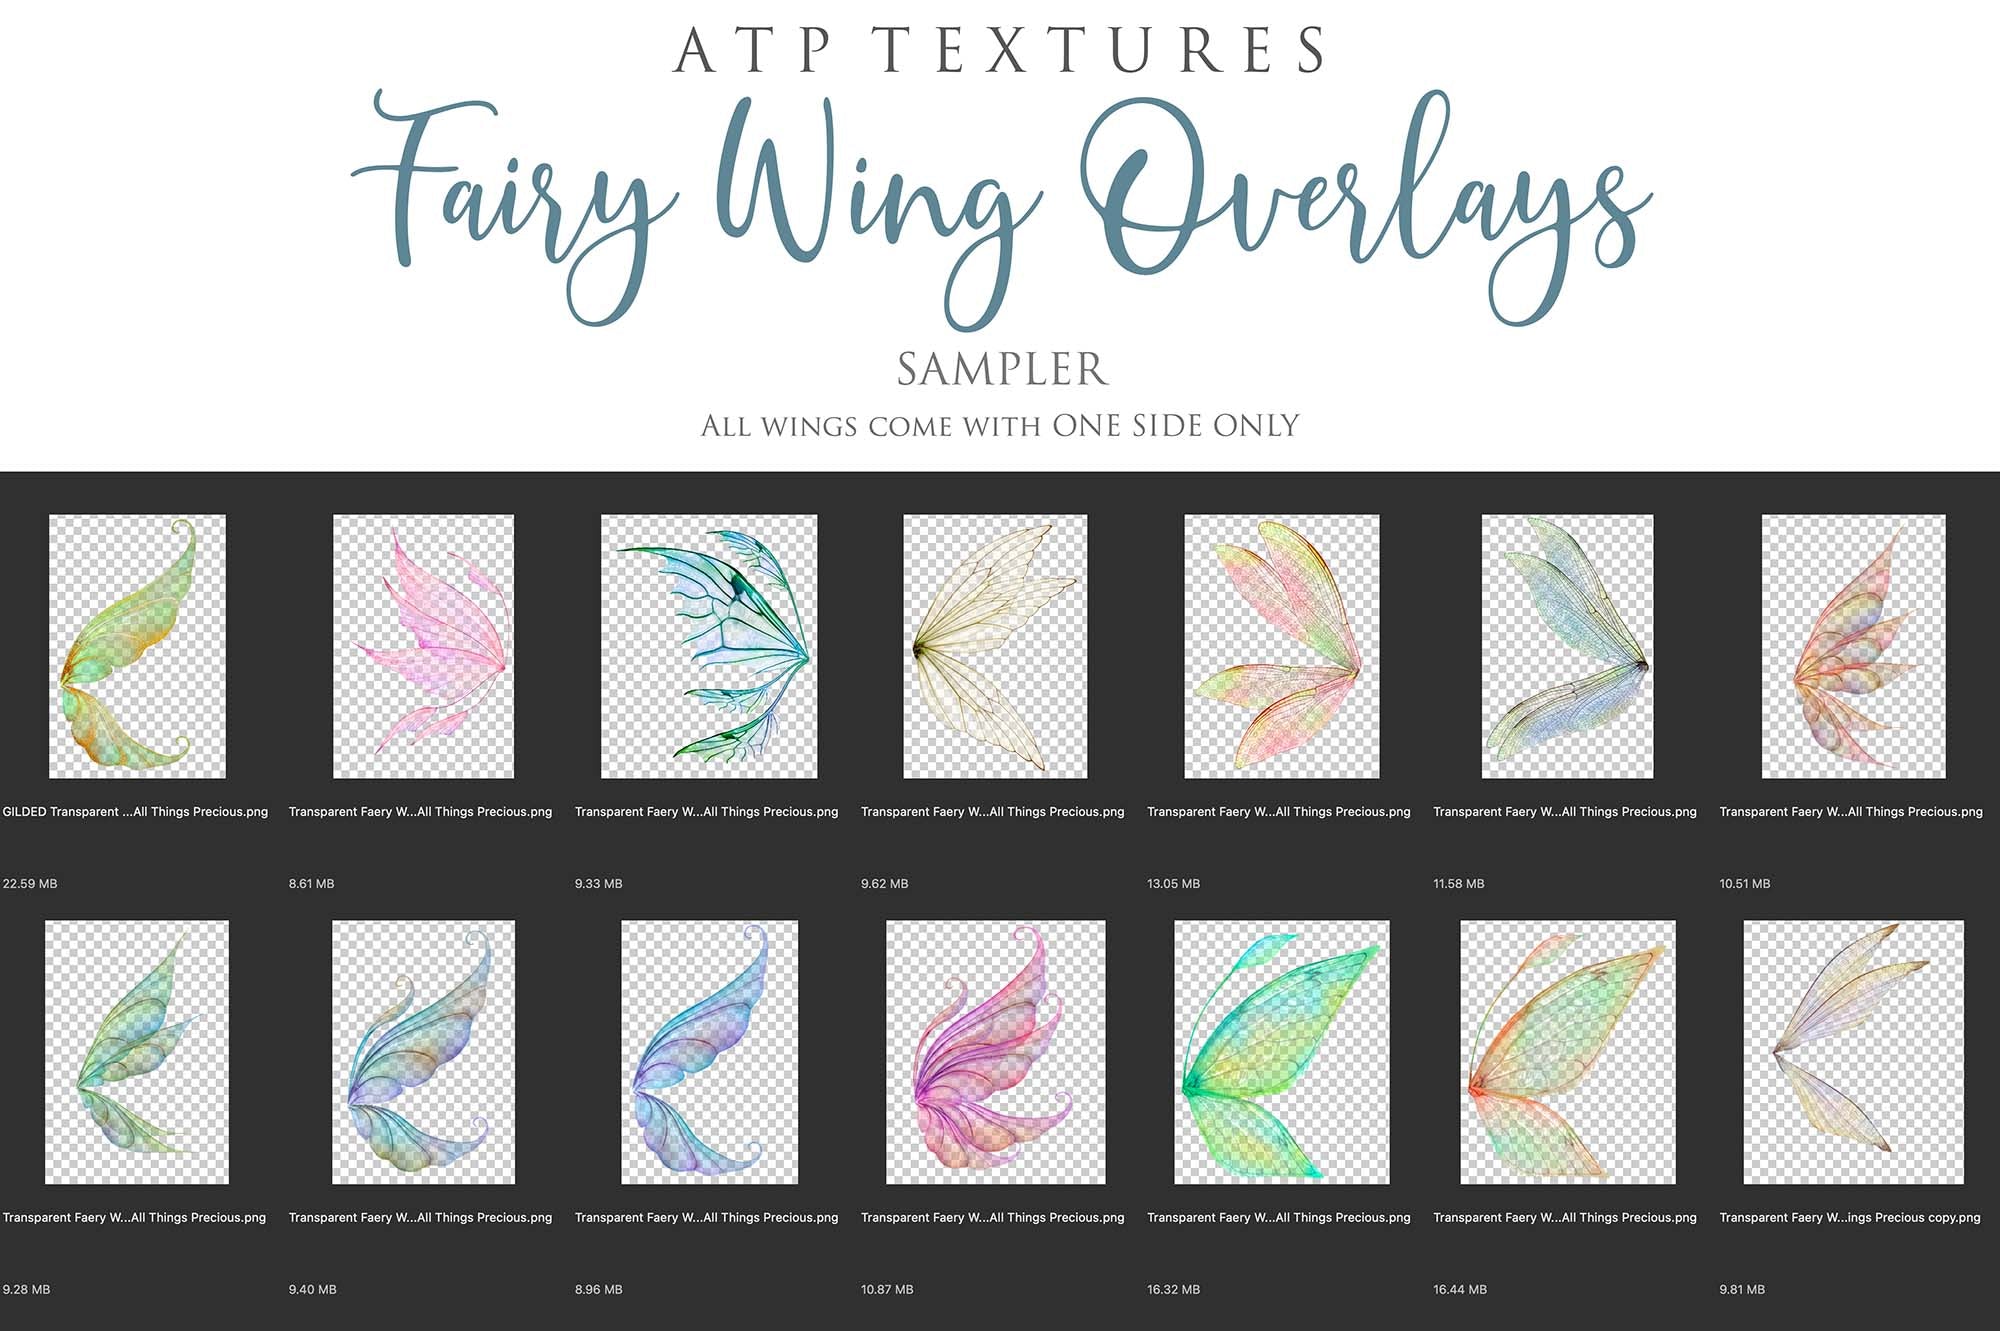 Fairy Wings Overlays For Photography, Photoshop, Digital art and Creatives. Transparent, high resolution wings for photographers. These are gorgeous PNG overlays for fantasy digital art and Child portraiture. colour, White fairy wings. Photo Overlays. Digital download. Graphic effects. ATP Textures